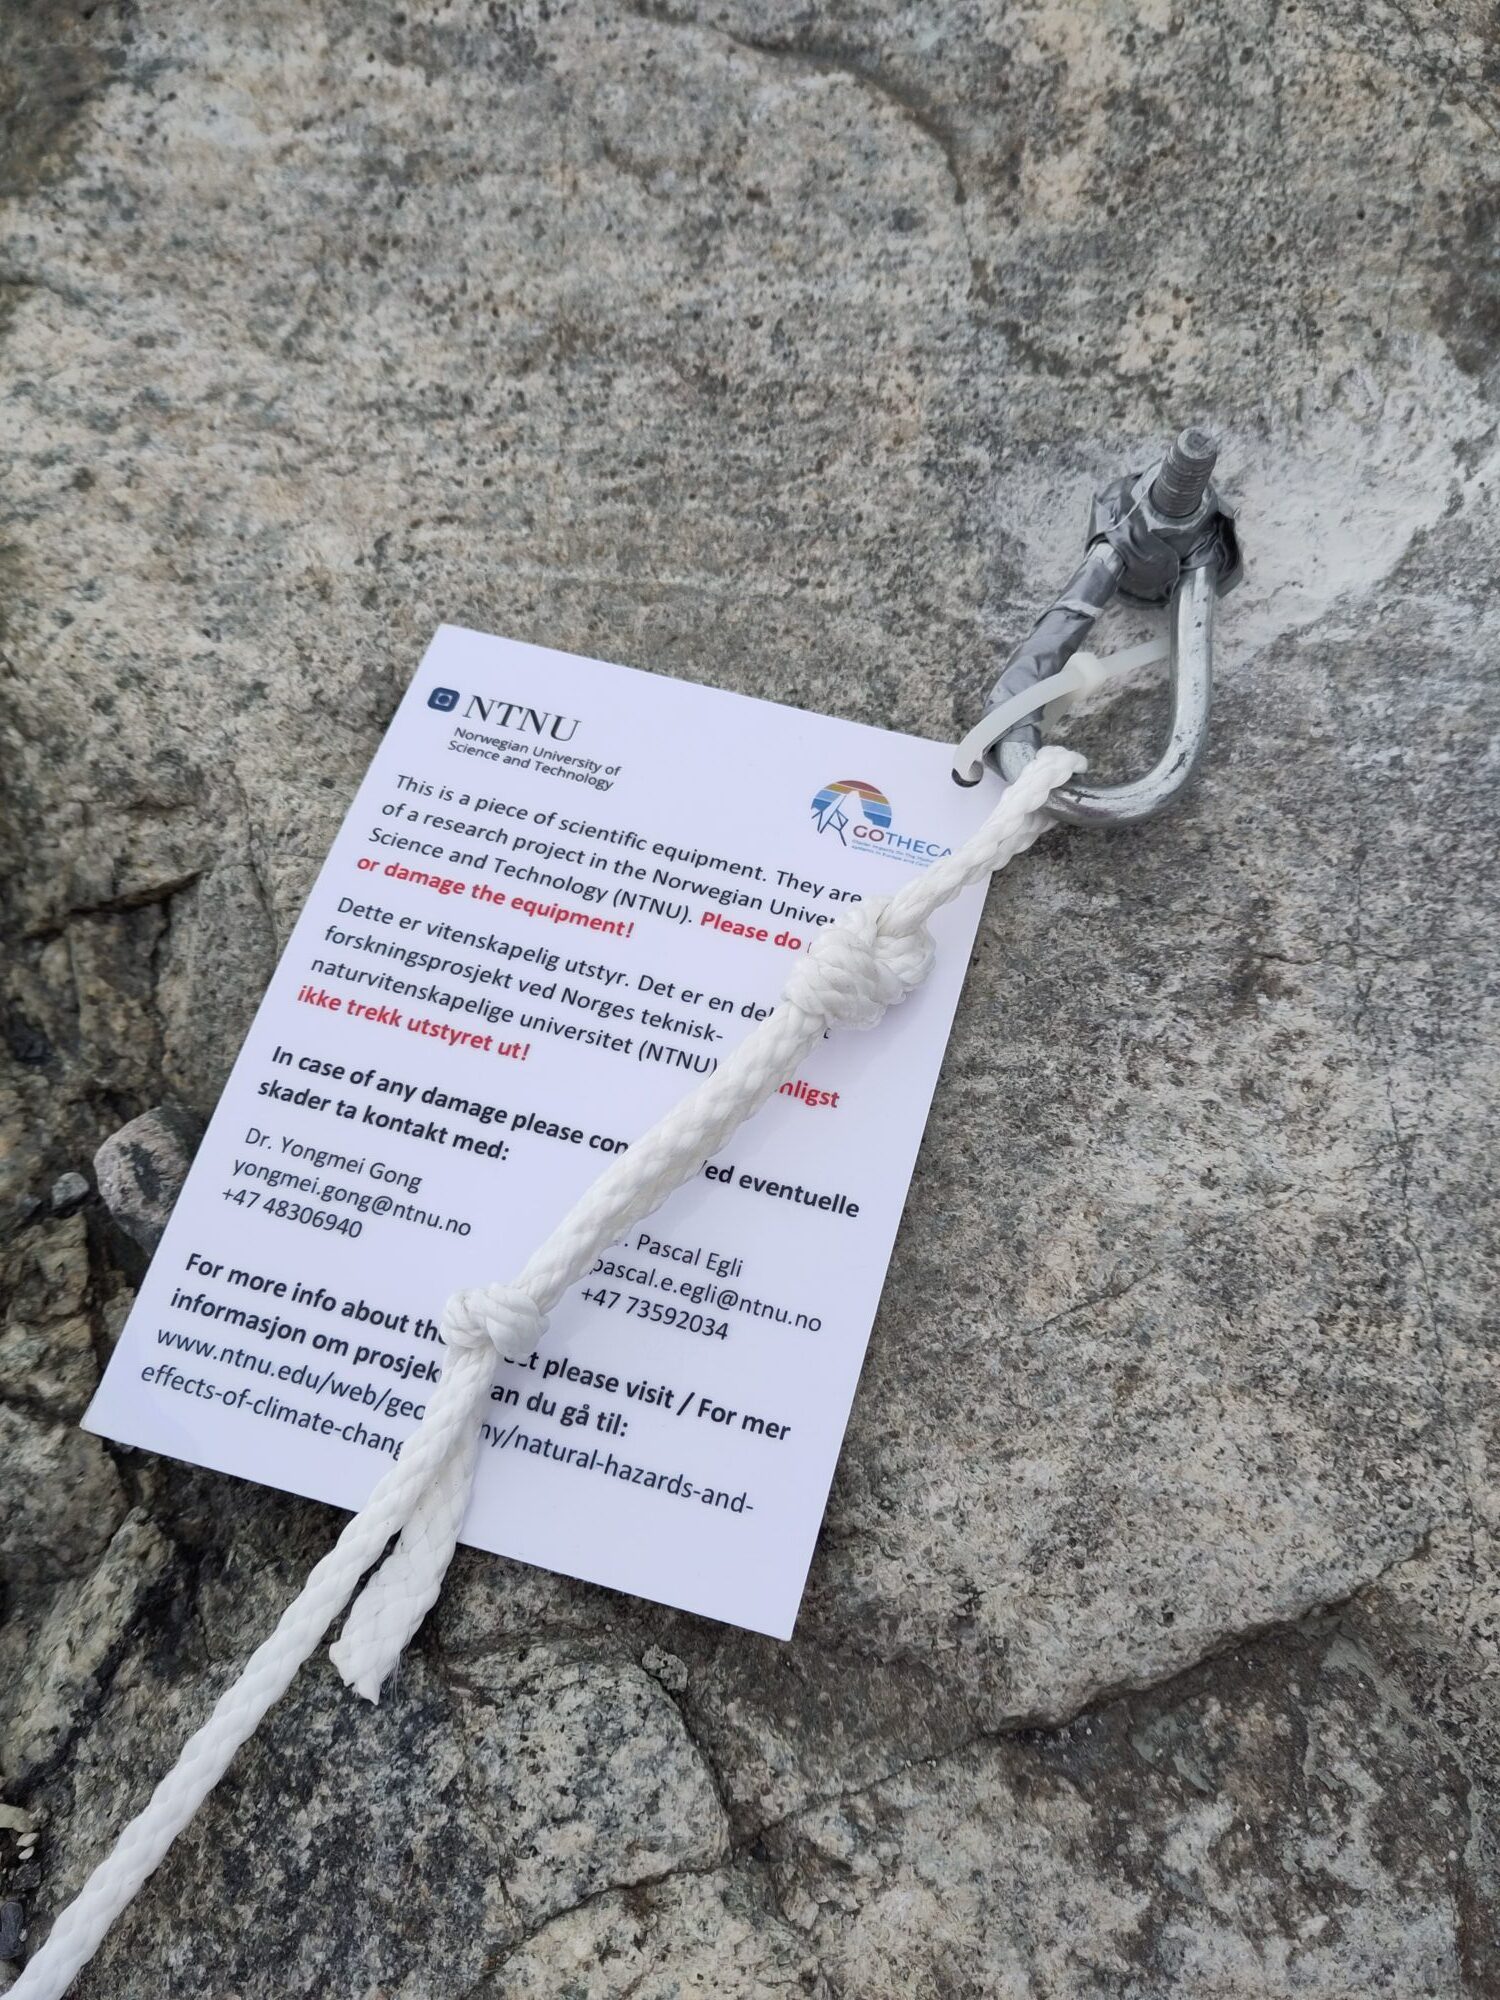 A group of researchers wants to help communities living close to melting glaciers. Photo shows an official information note to bypassers from the scientists at NTNU.